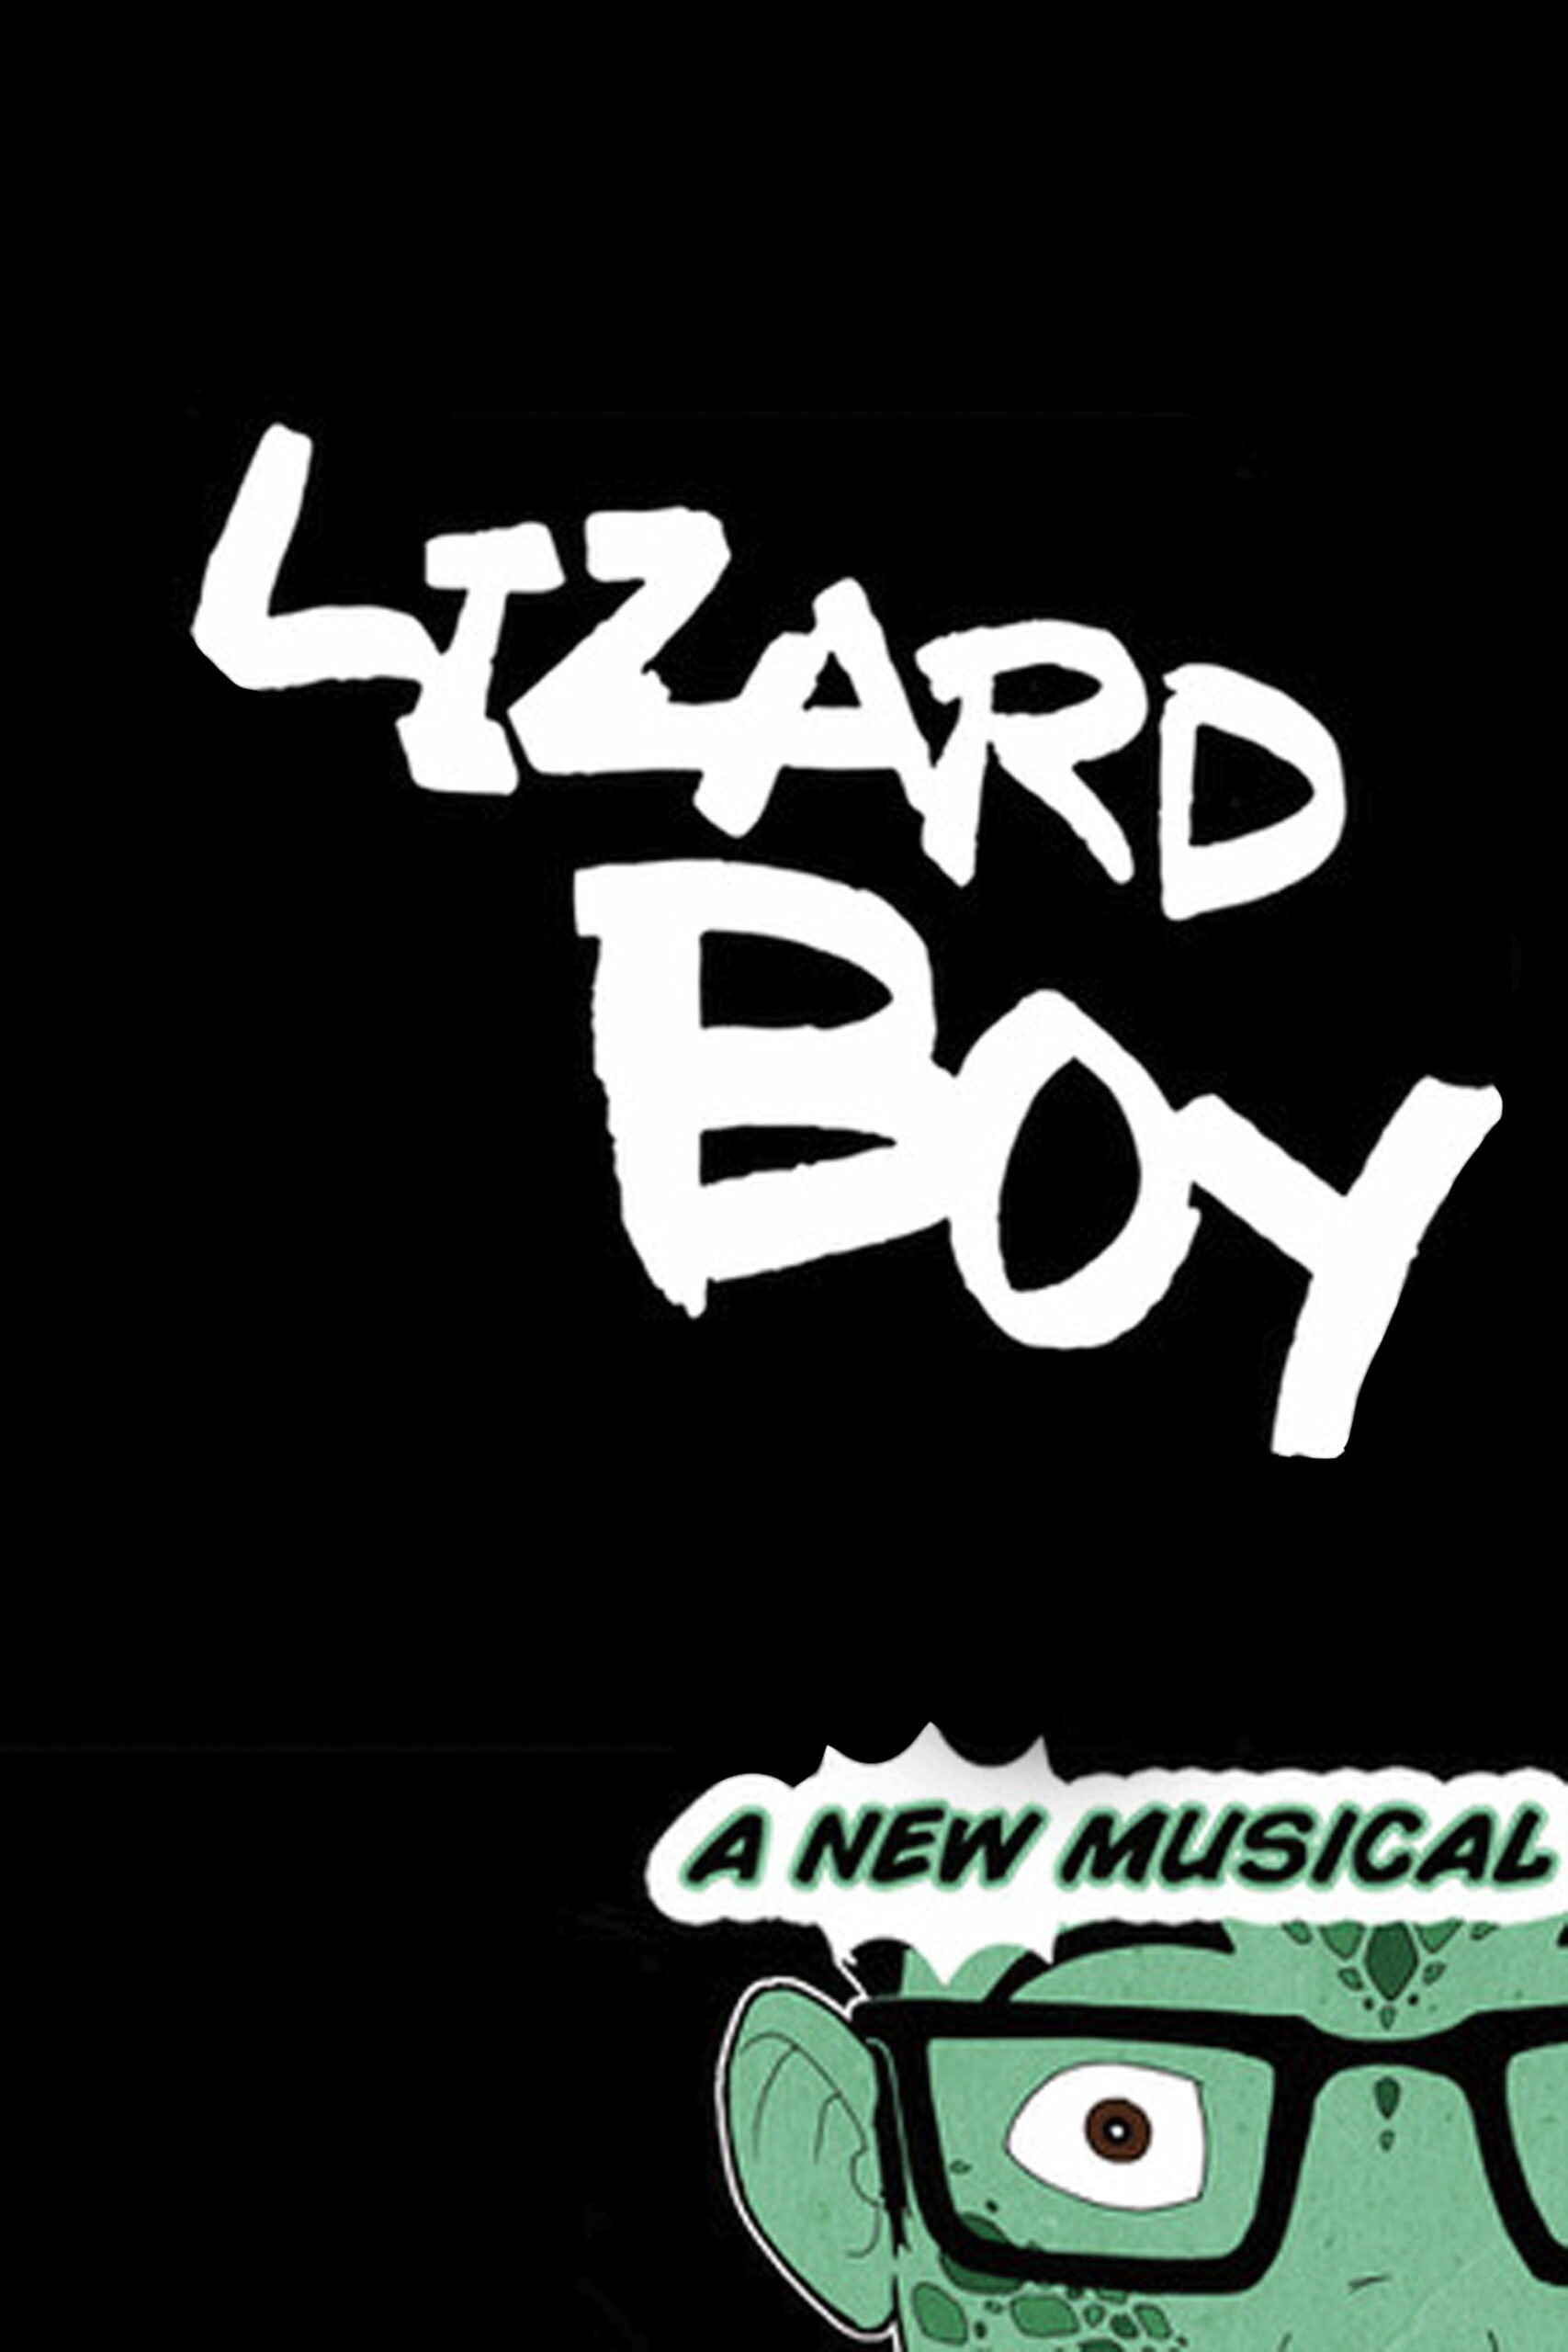 Promotional poster image for lLizard Boy the Musical